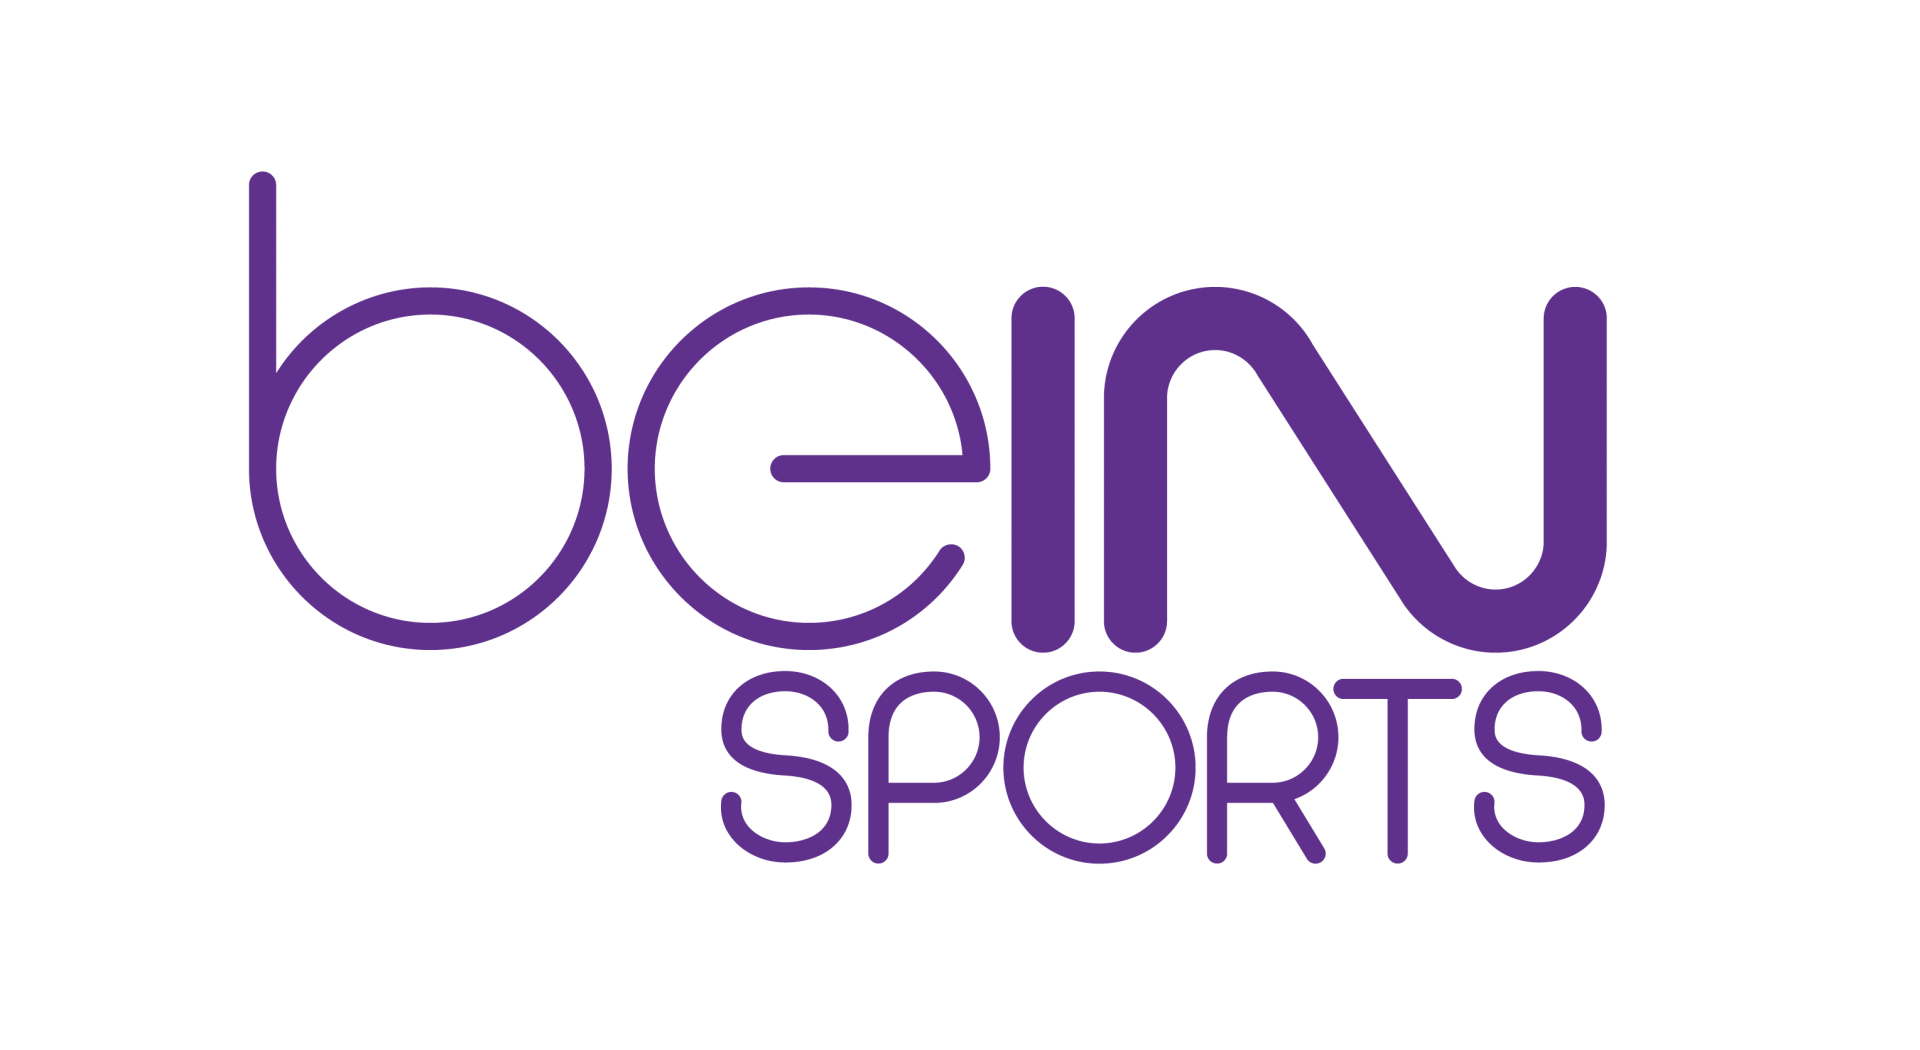 Producing and designing digital content on beIN SPORT website and Social Media Platform. Now an advertising agency for beIN SPORT in Thailand.